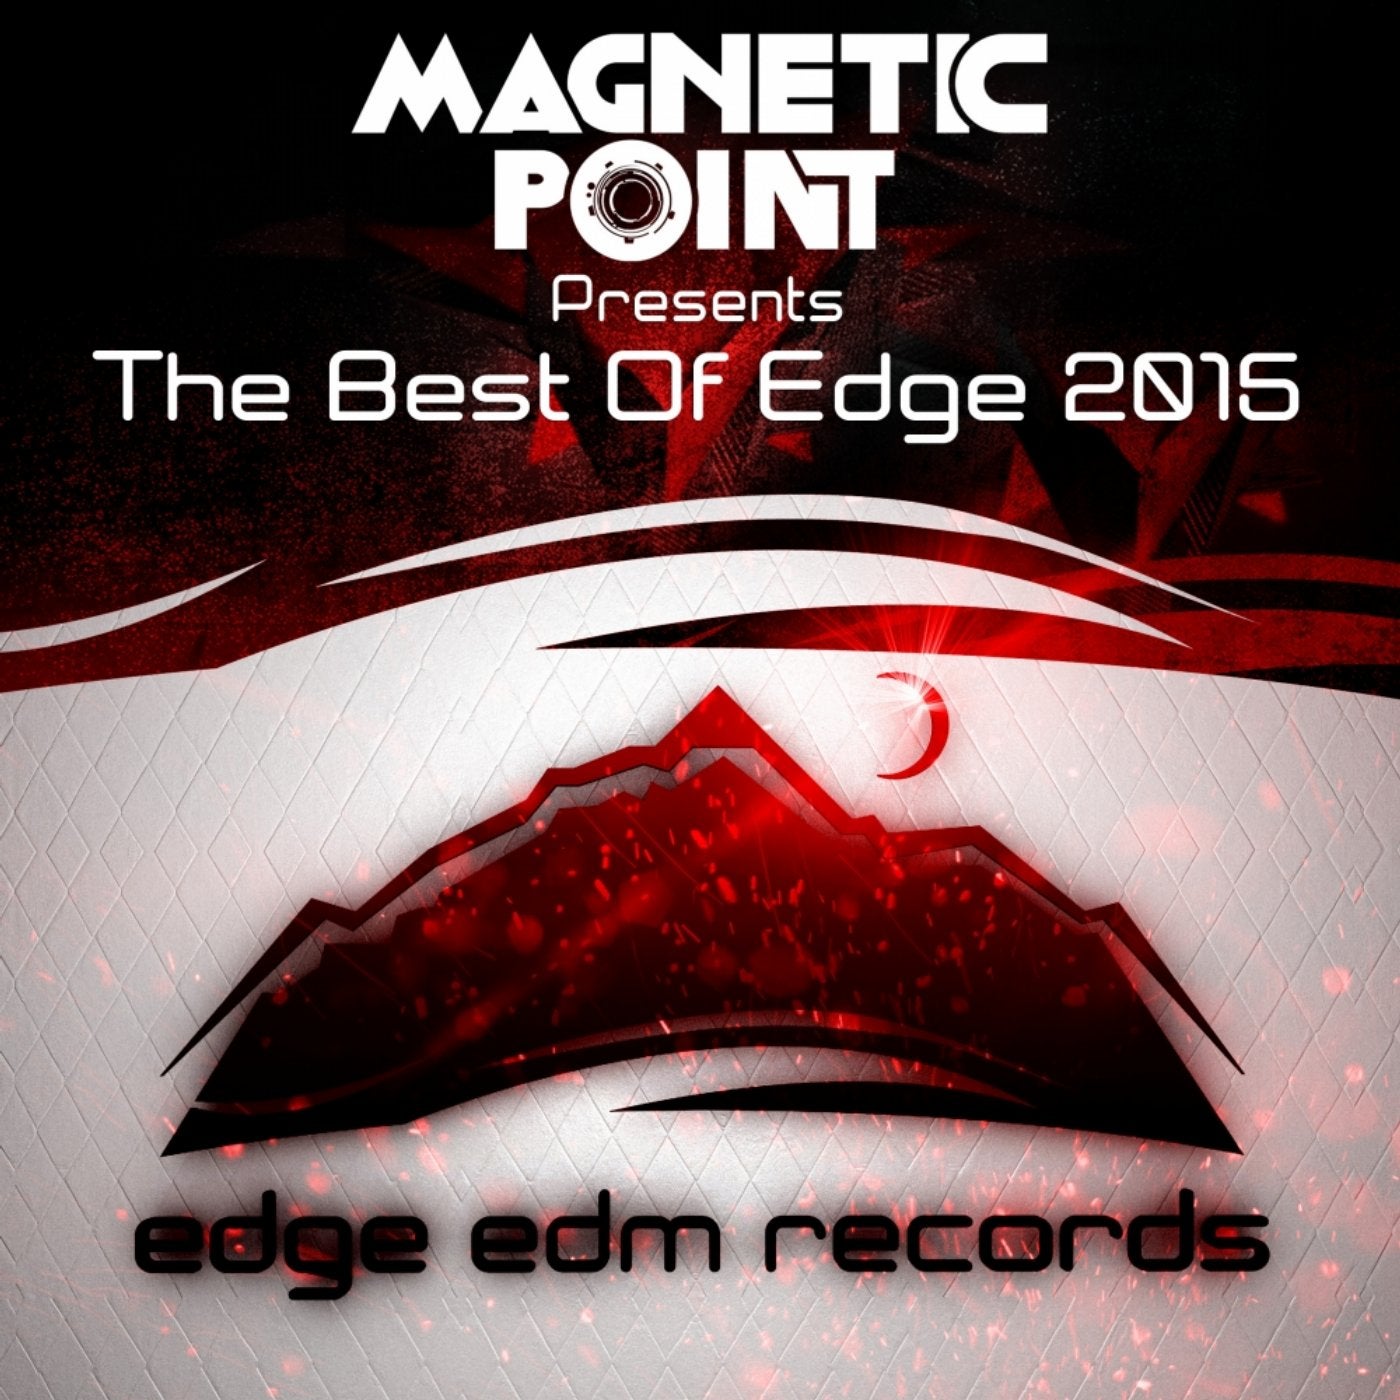 The Best of Edge 2015 (Compiled by Magnetic Point)